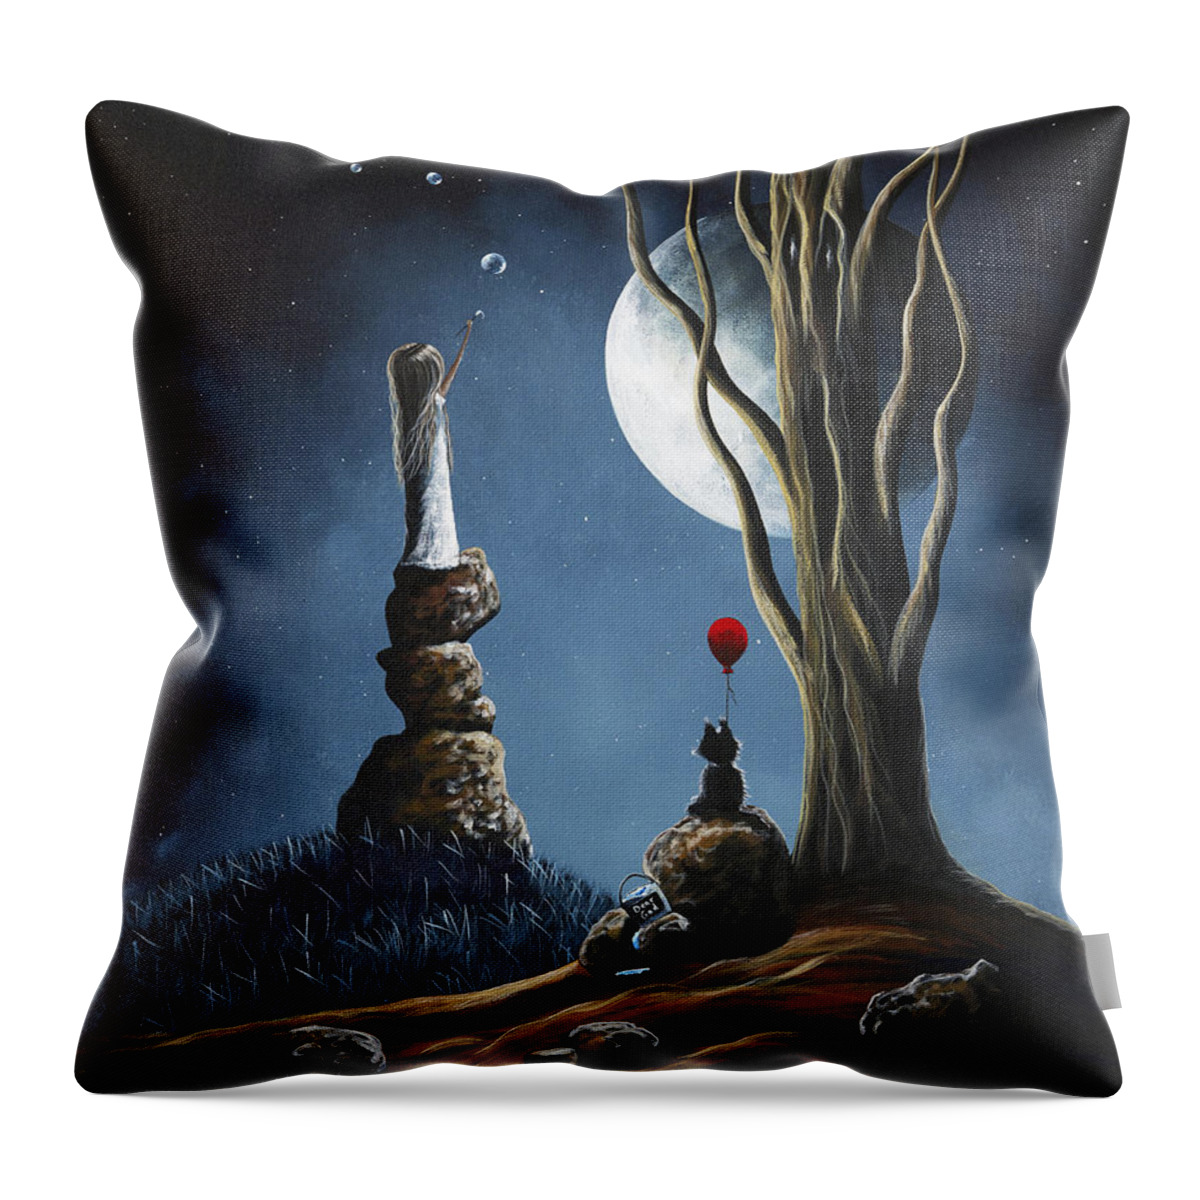 Surreal Art Throw Pillow featuring the painting Surreal Art Print by Shawna Erback #2 by Moonlight Art Parlour